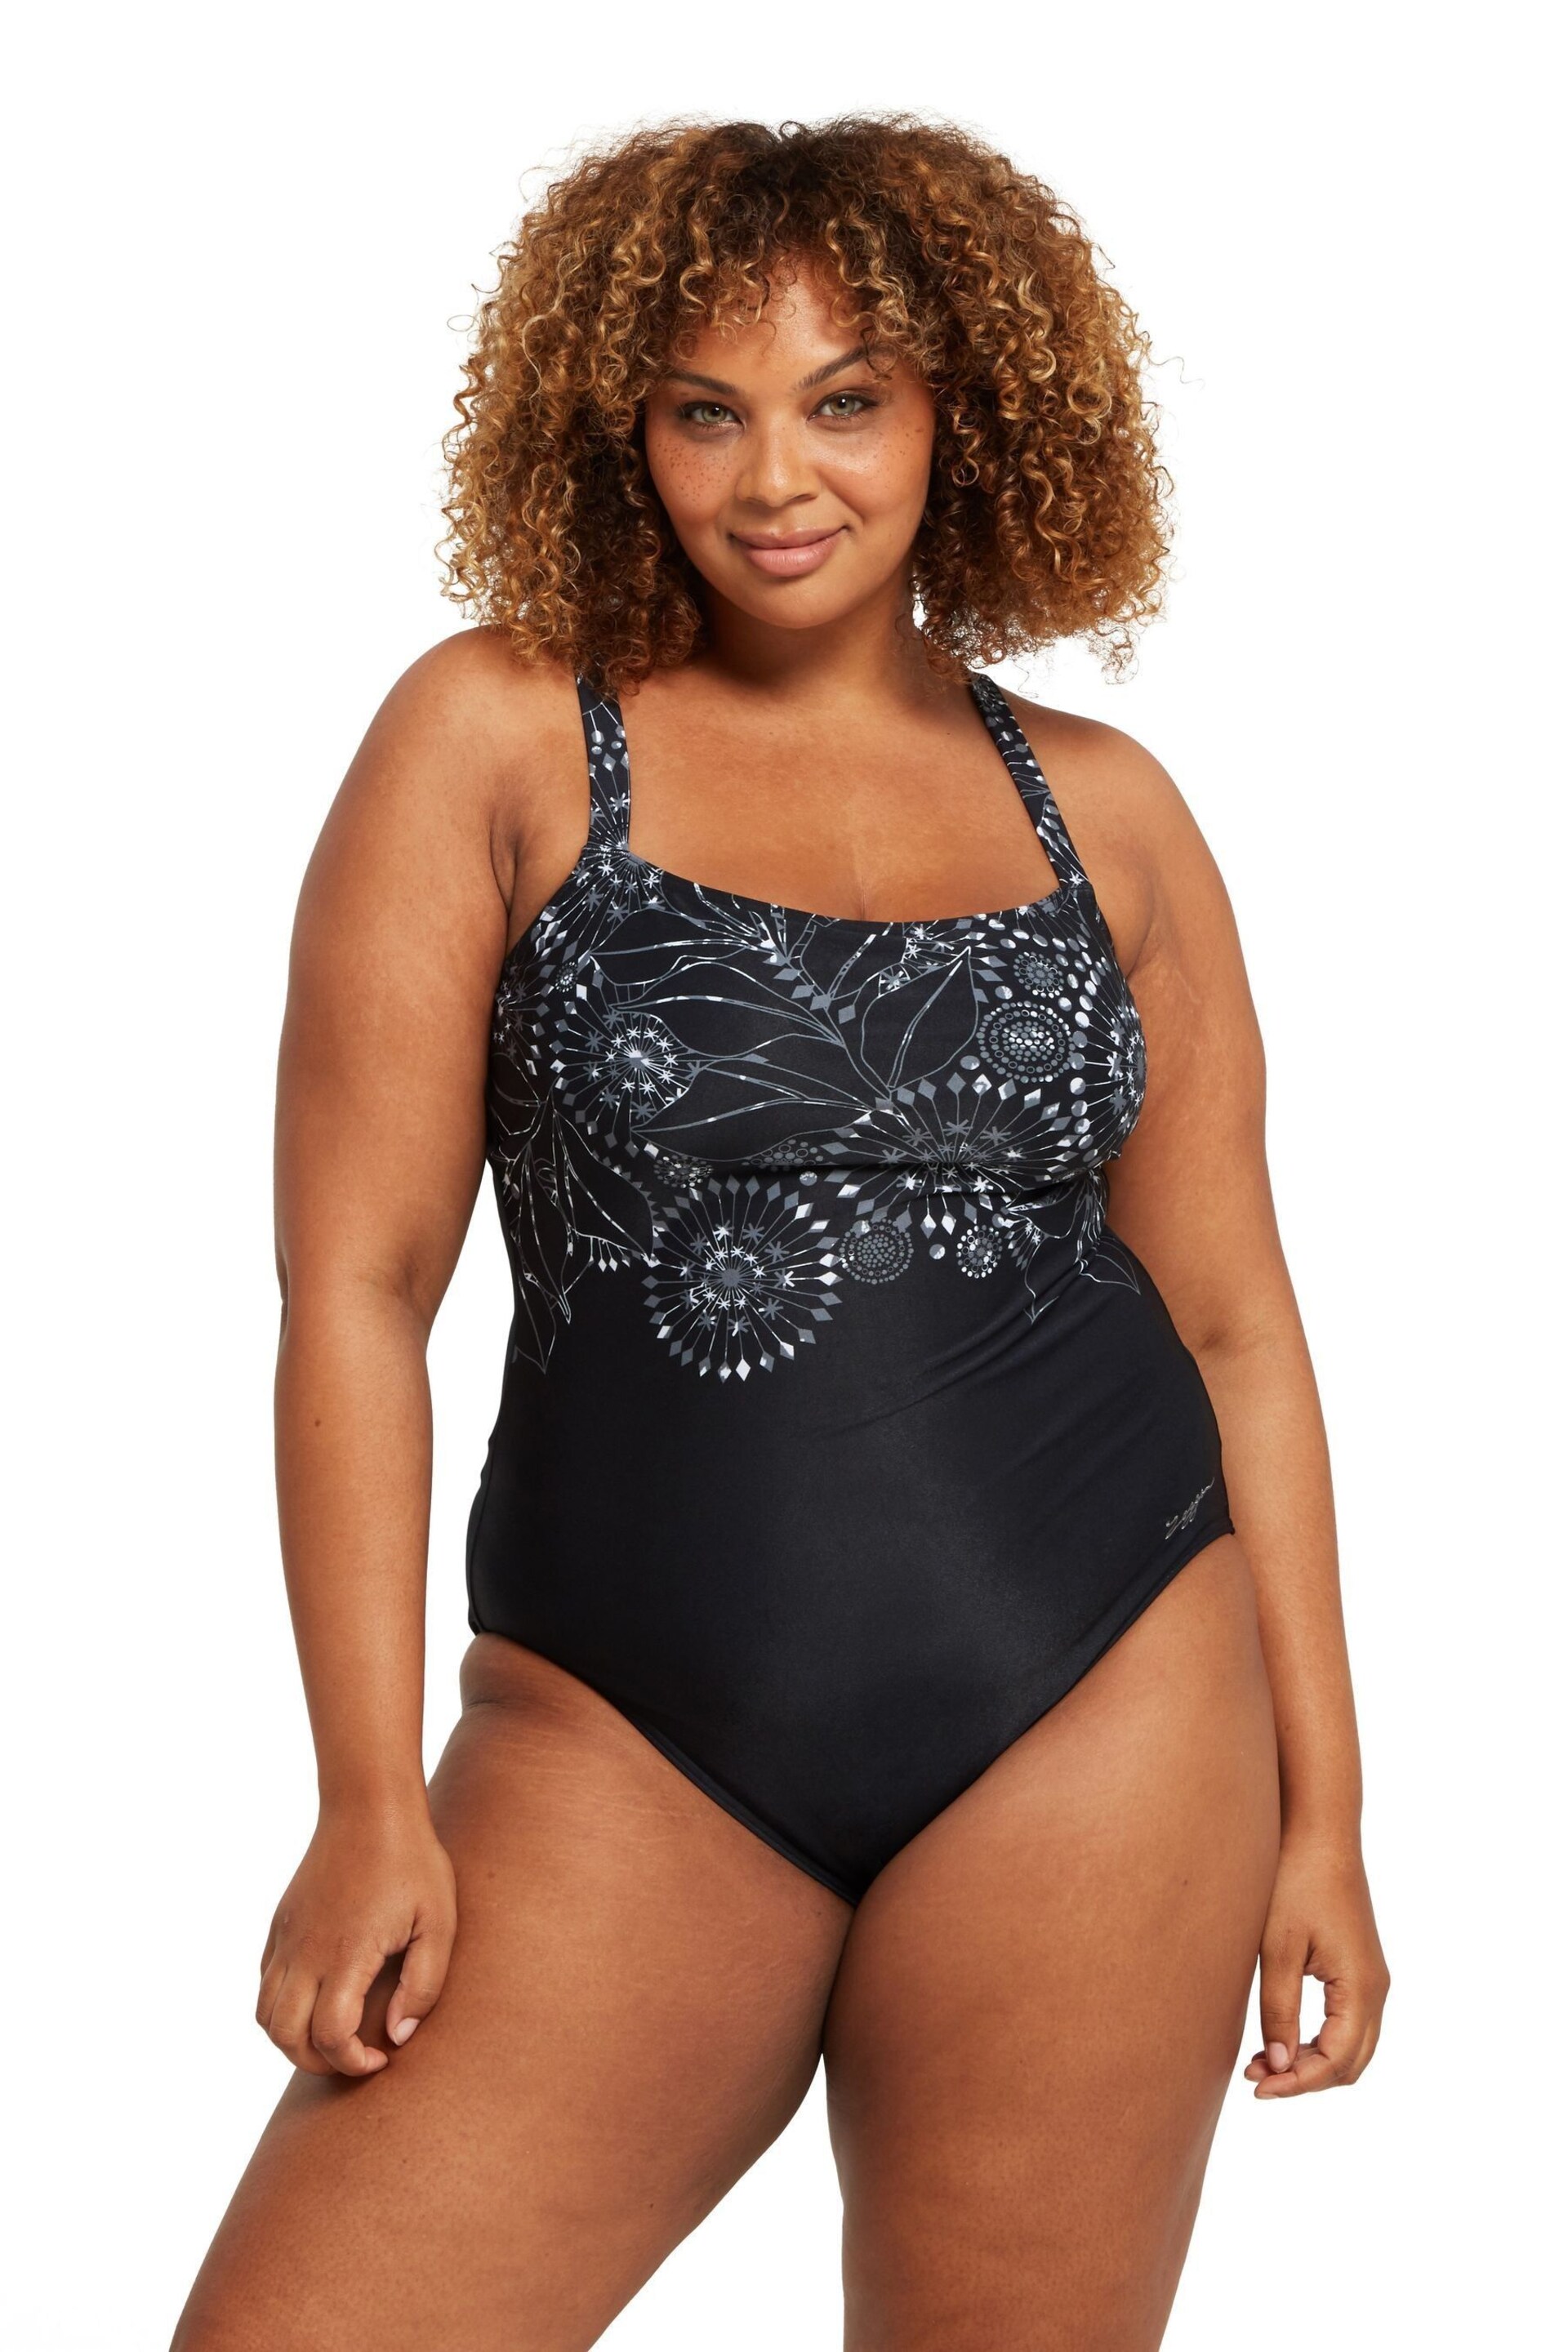 Zoggs Adjustable Classicback One Piece Swimsuit with Foam Cup Support - Image 3 of 8